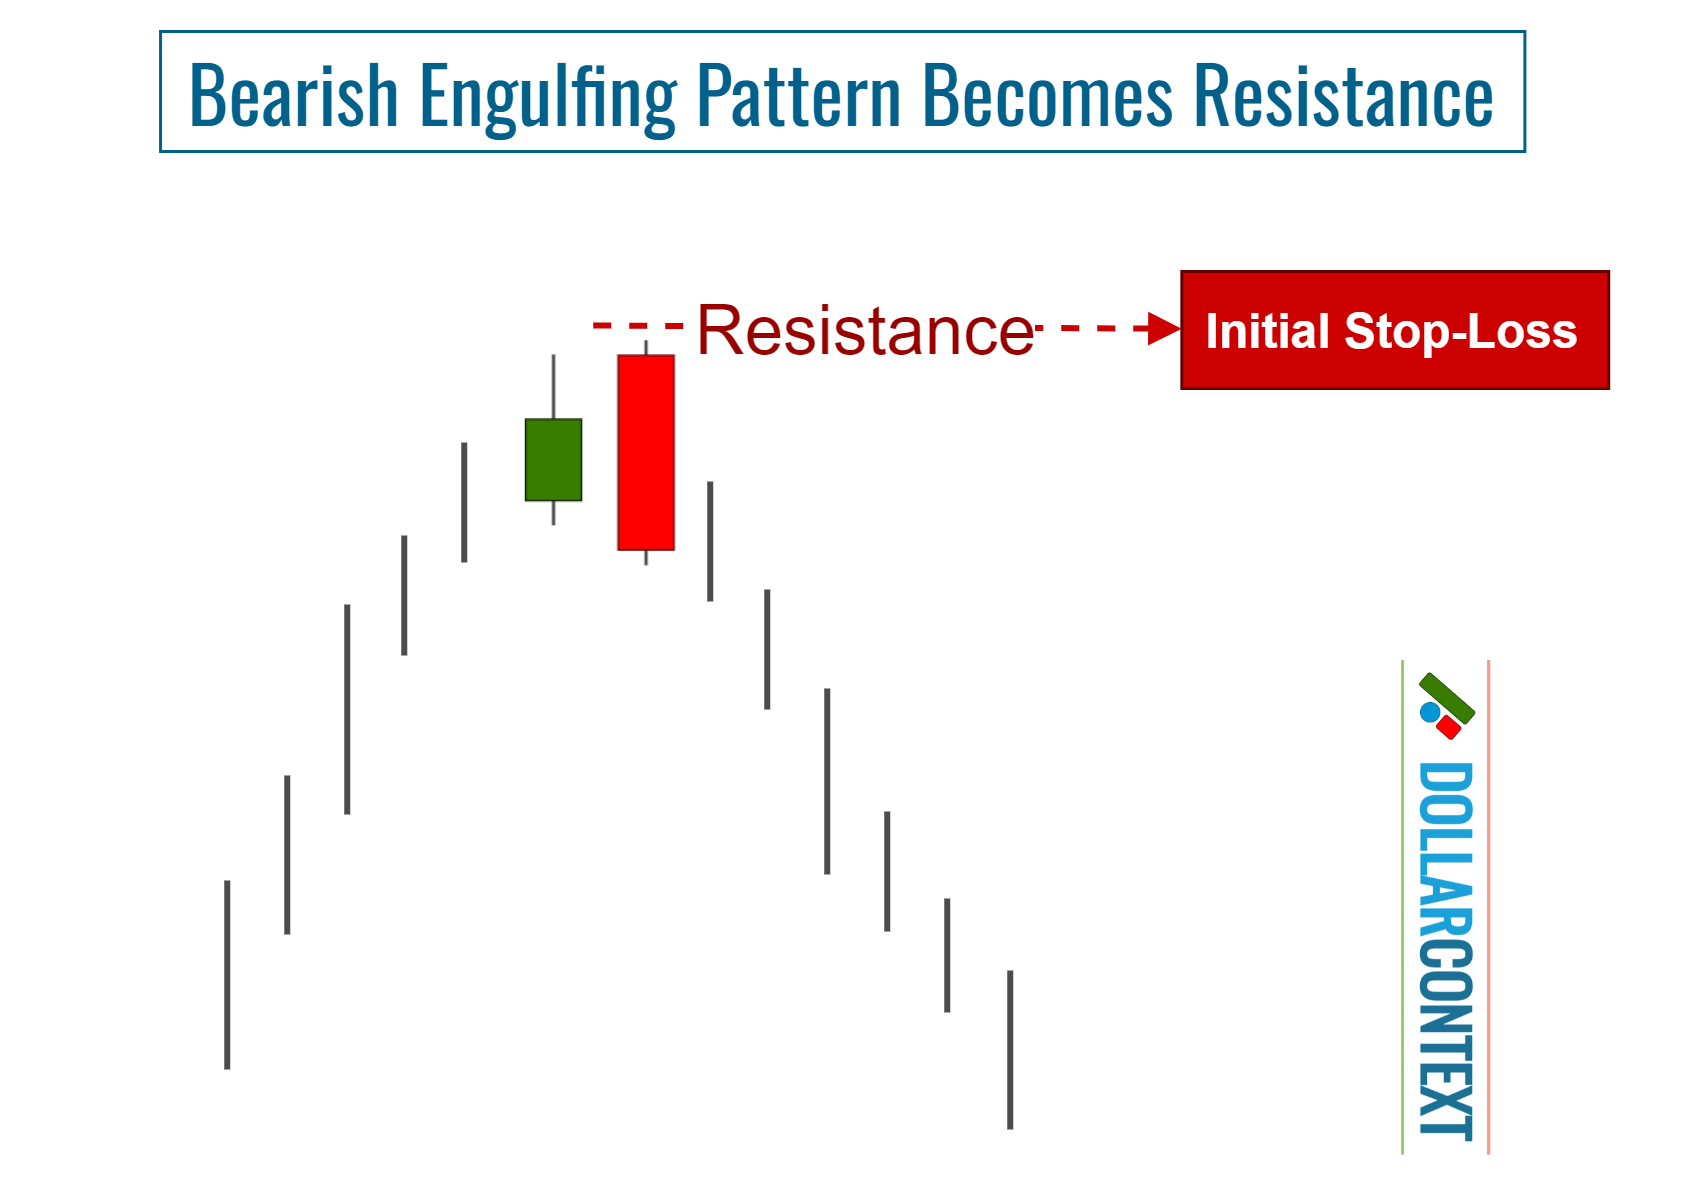 Initial Stop-Loss for a Bearish Engulfing Pattern